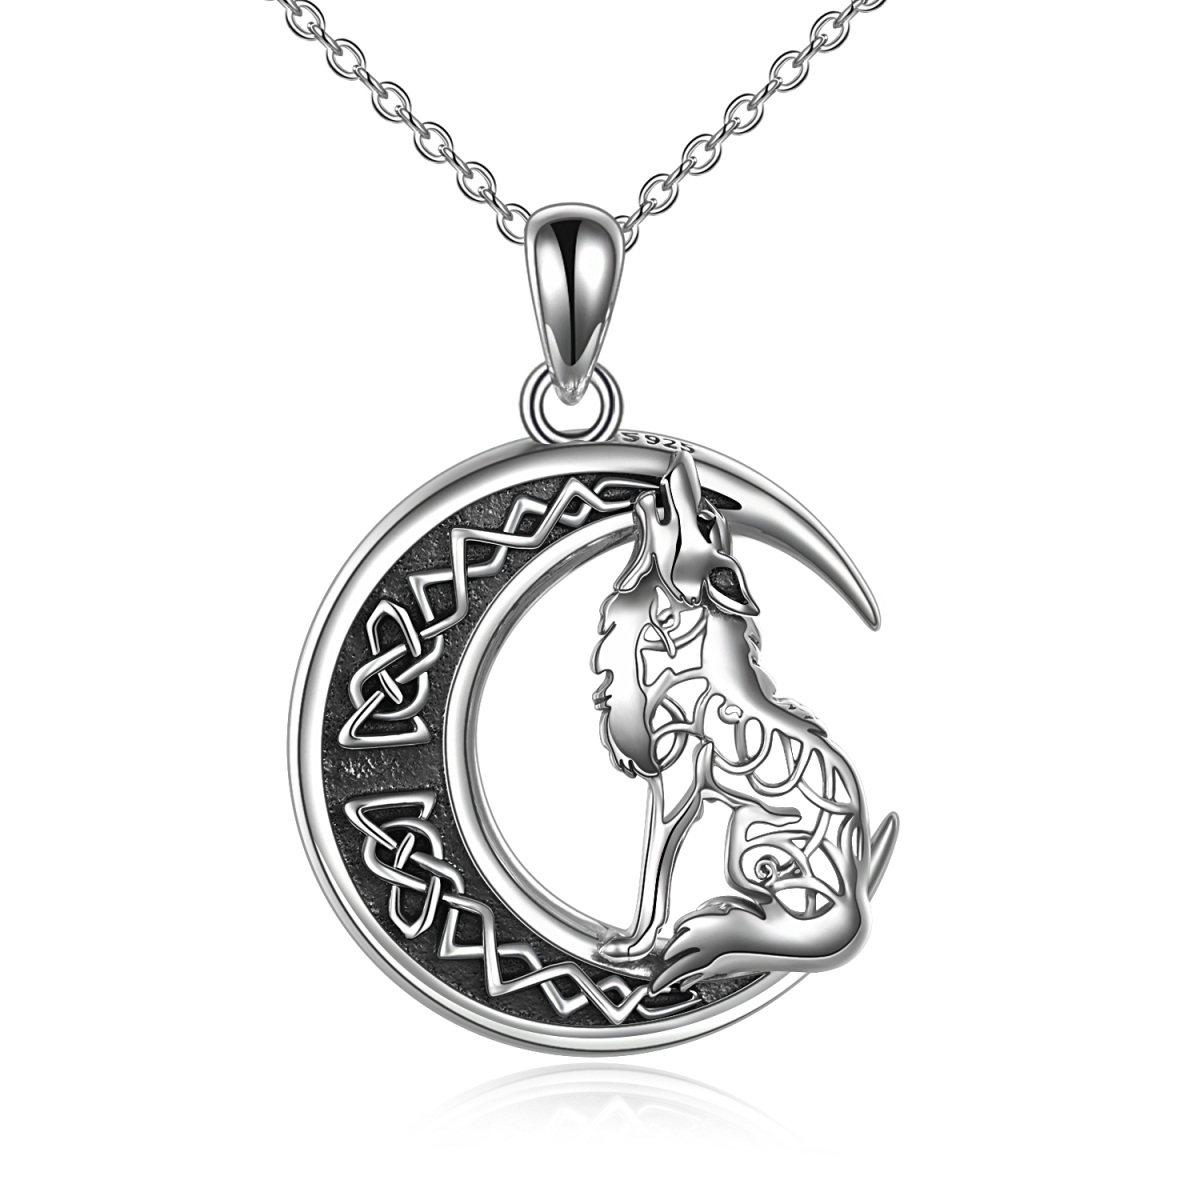 Sterling Silver Wolf & Moon Pendant Necklace-1